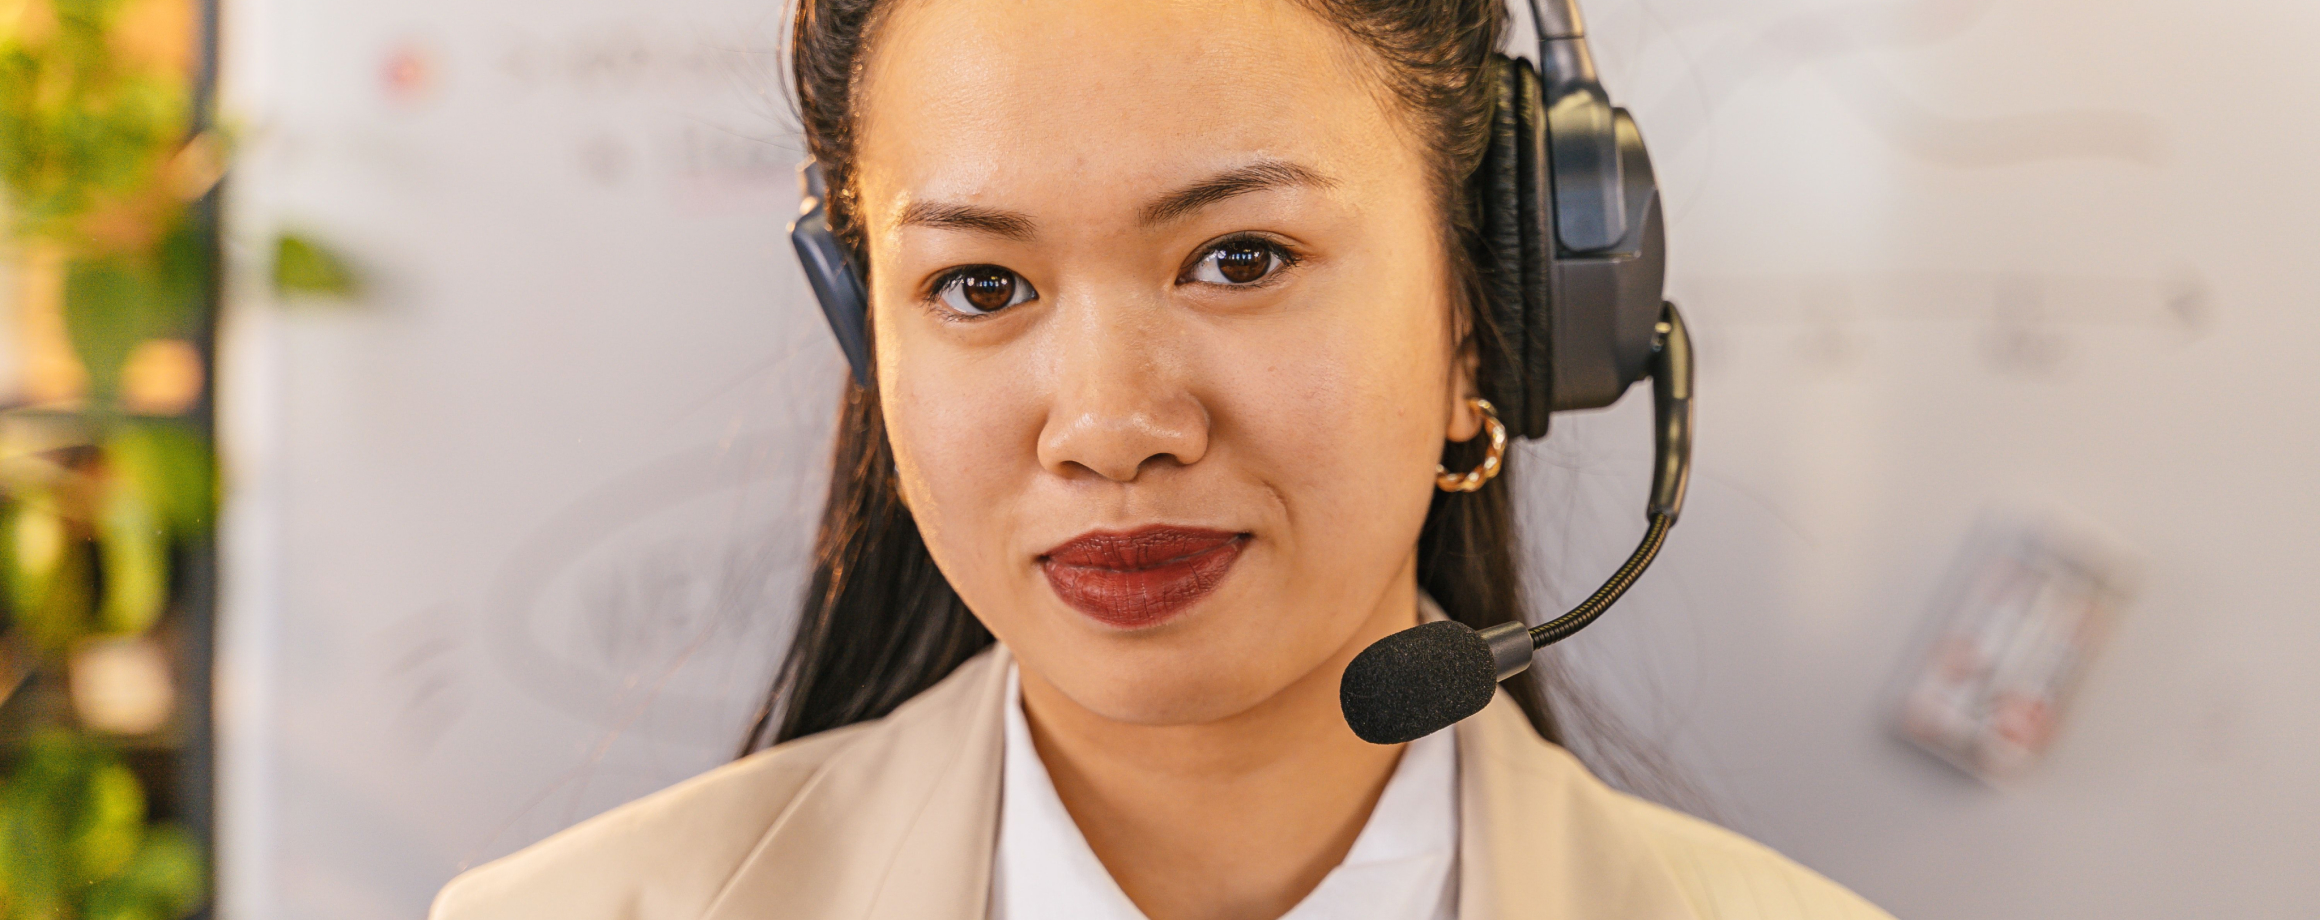 A female answering agent with headset